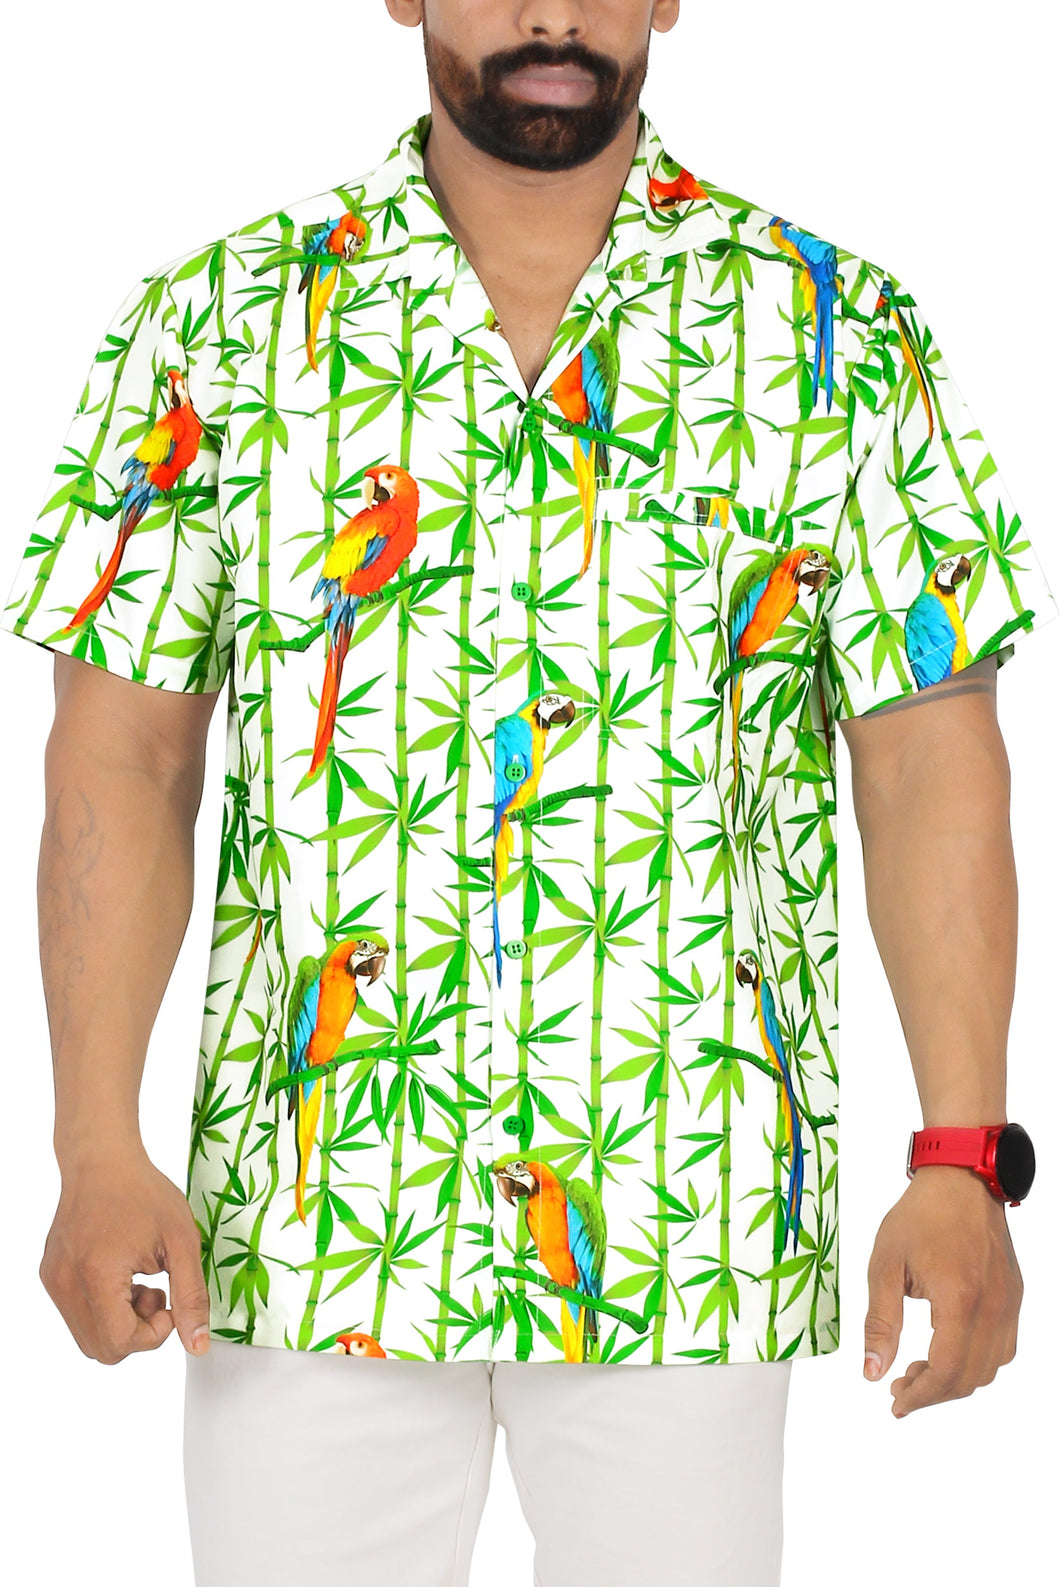 Allover White Parrot and Leaves Printed Hawaiian Beach Shirt For Men